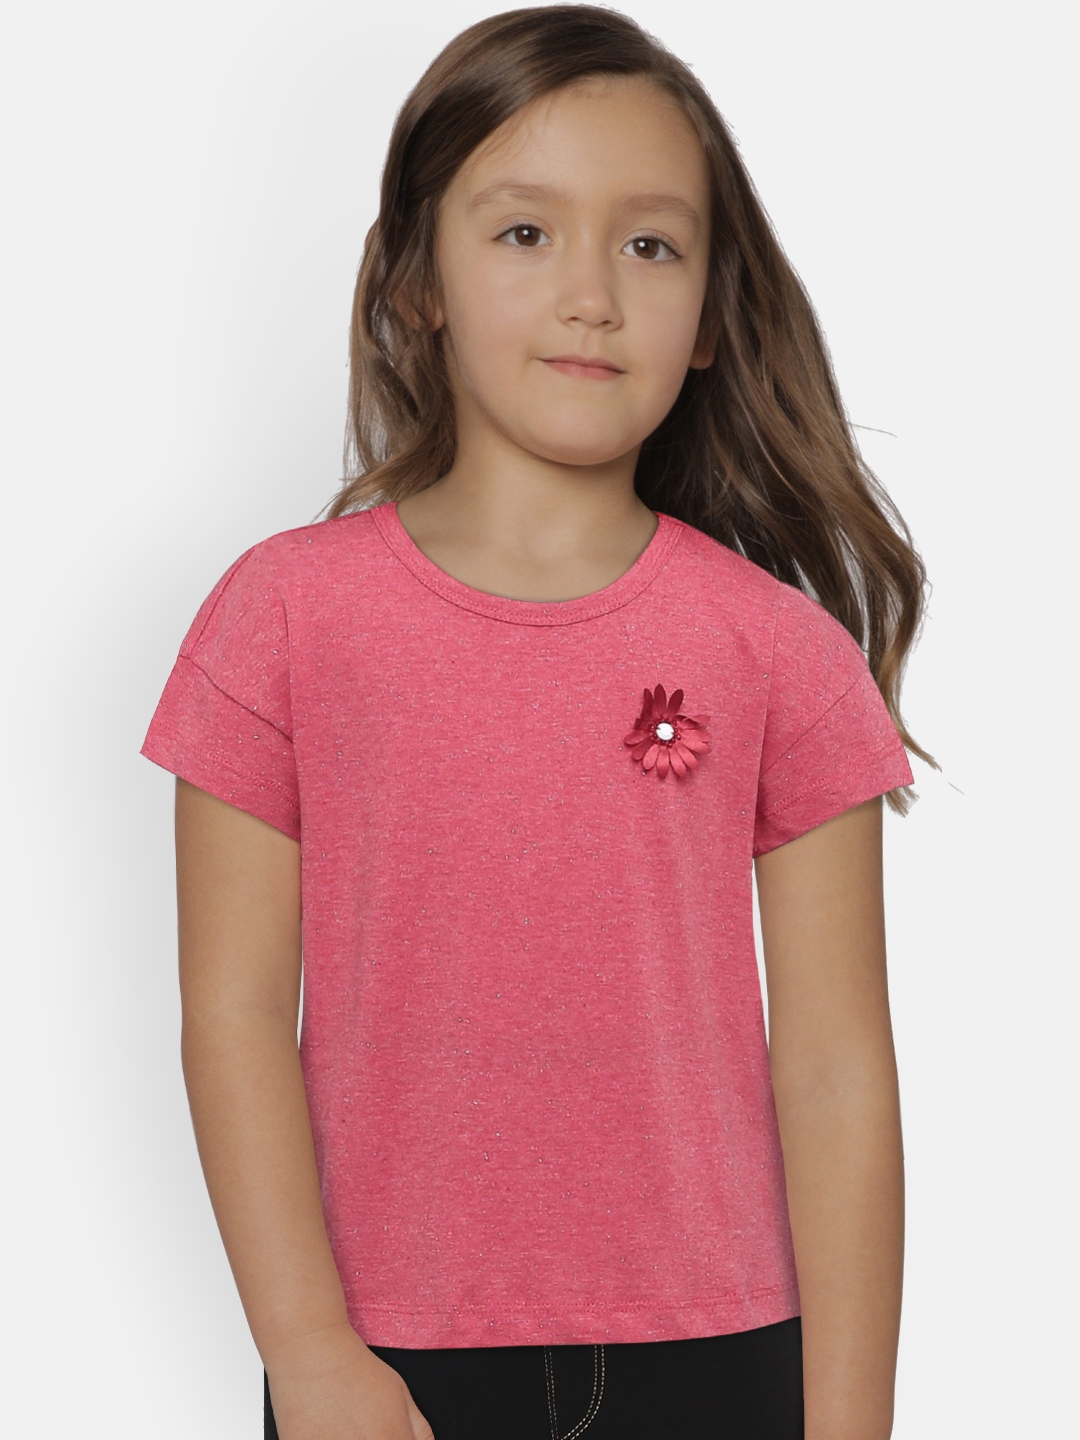 United Colors of Benetton Girls Blouse